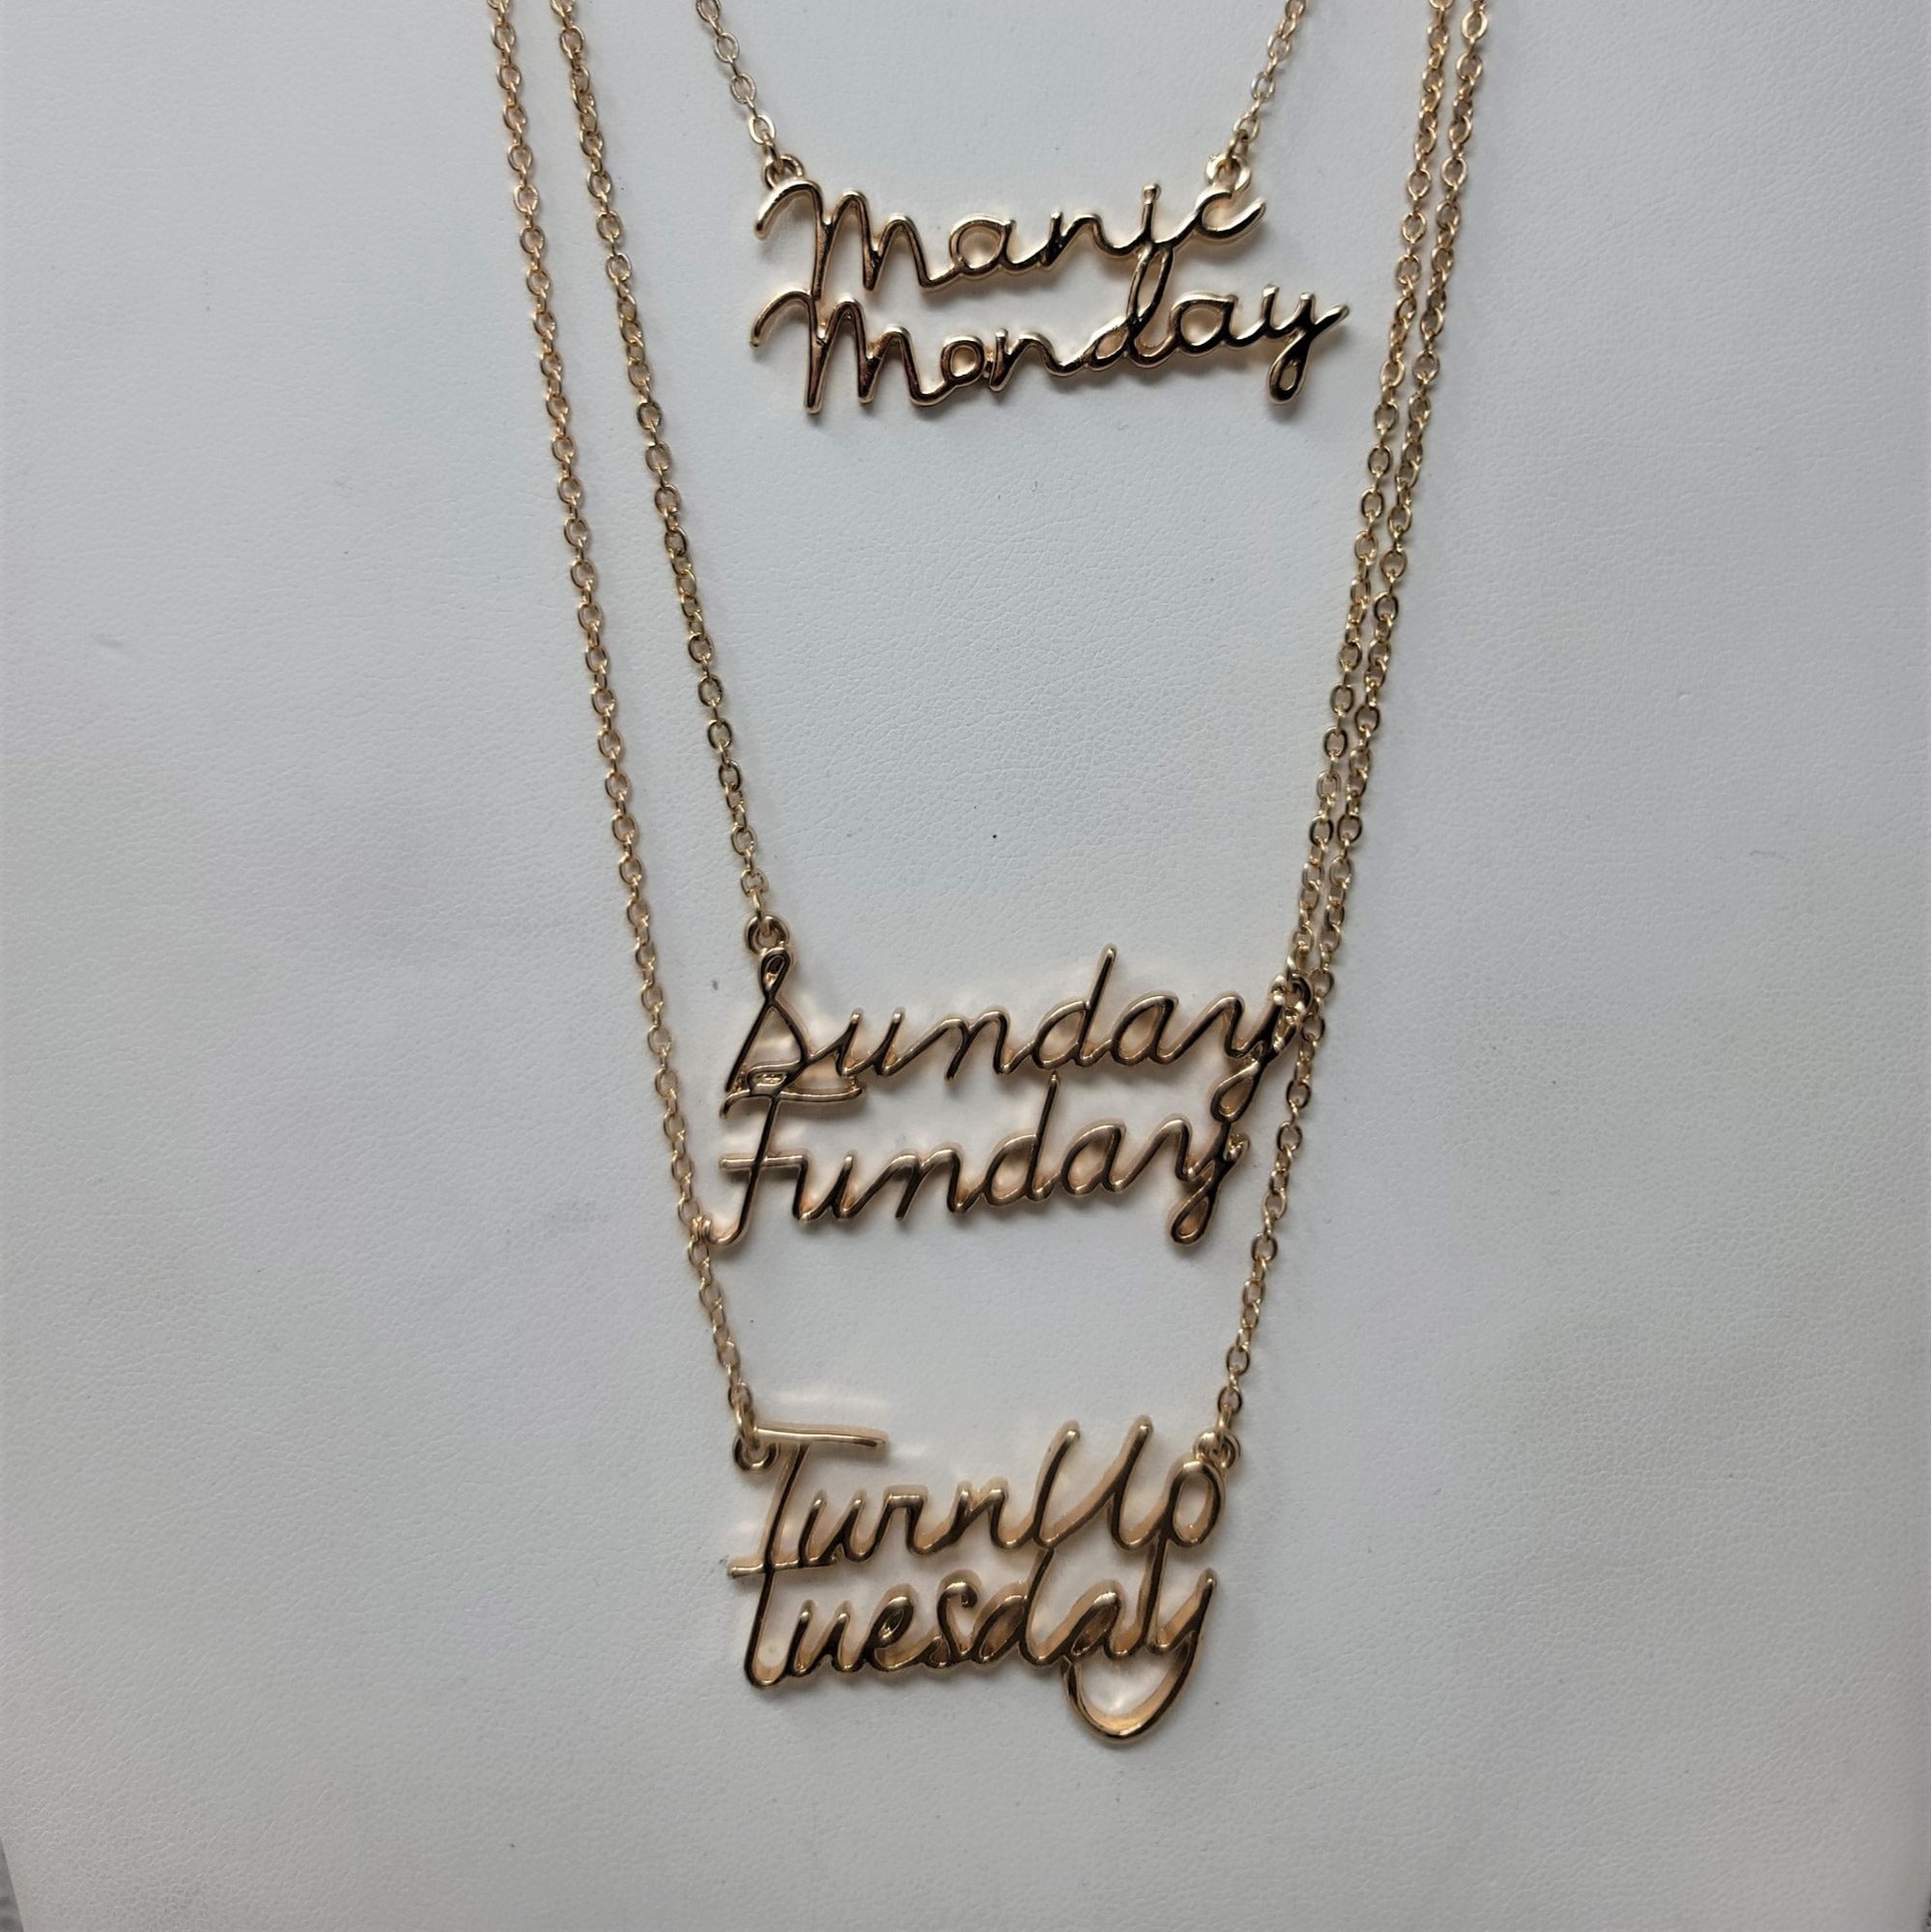 4 Gold tone Necklaces Day of the Week Style